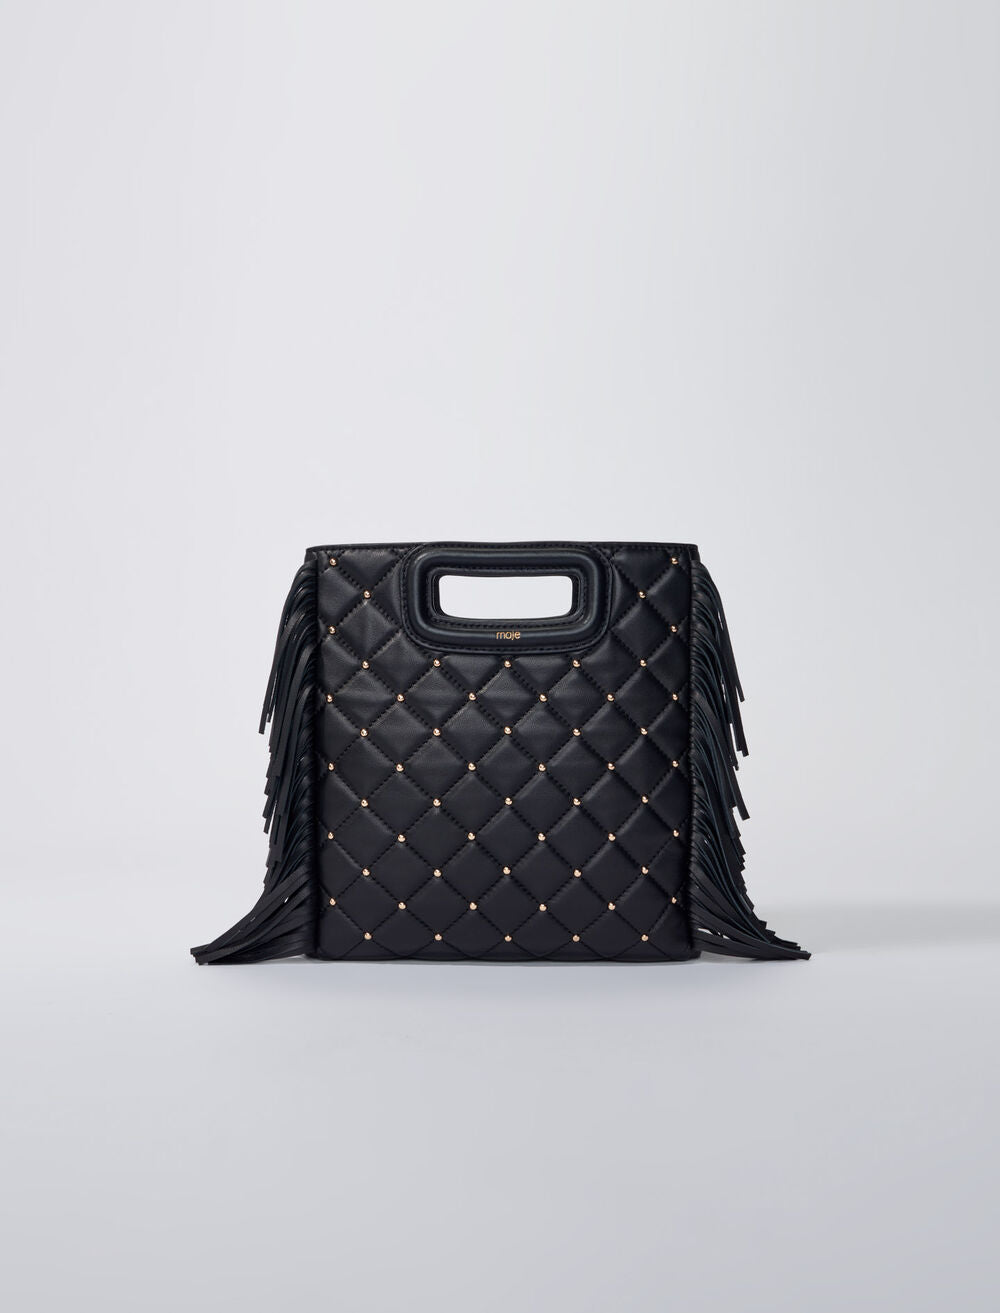 Black-featured-M bag in studded, quilted leather